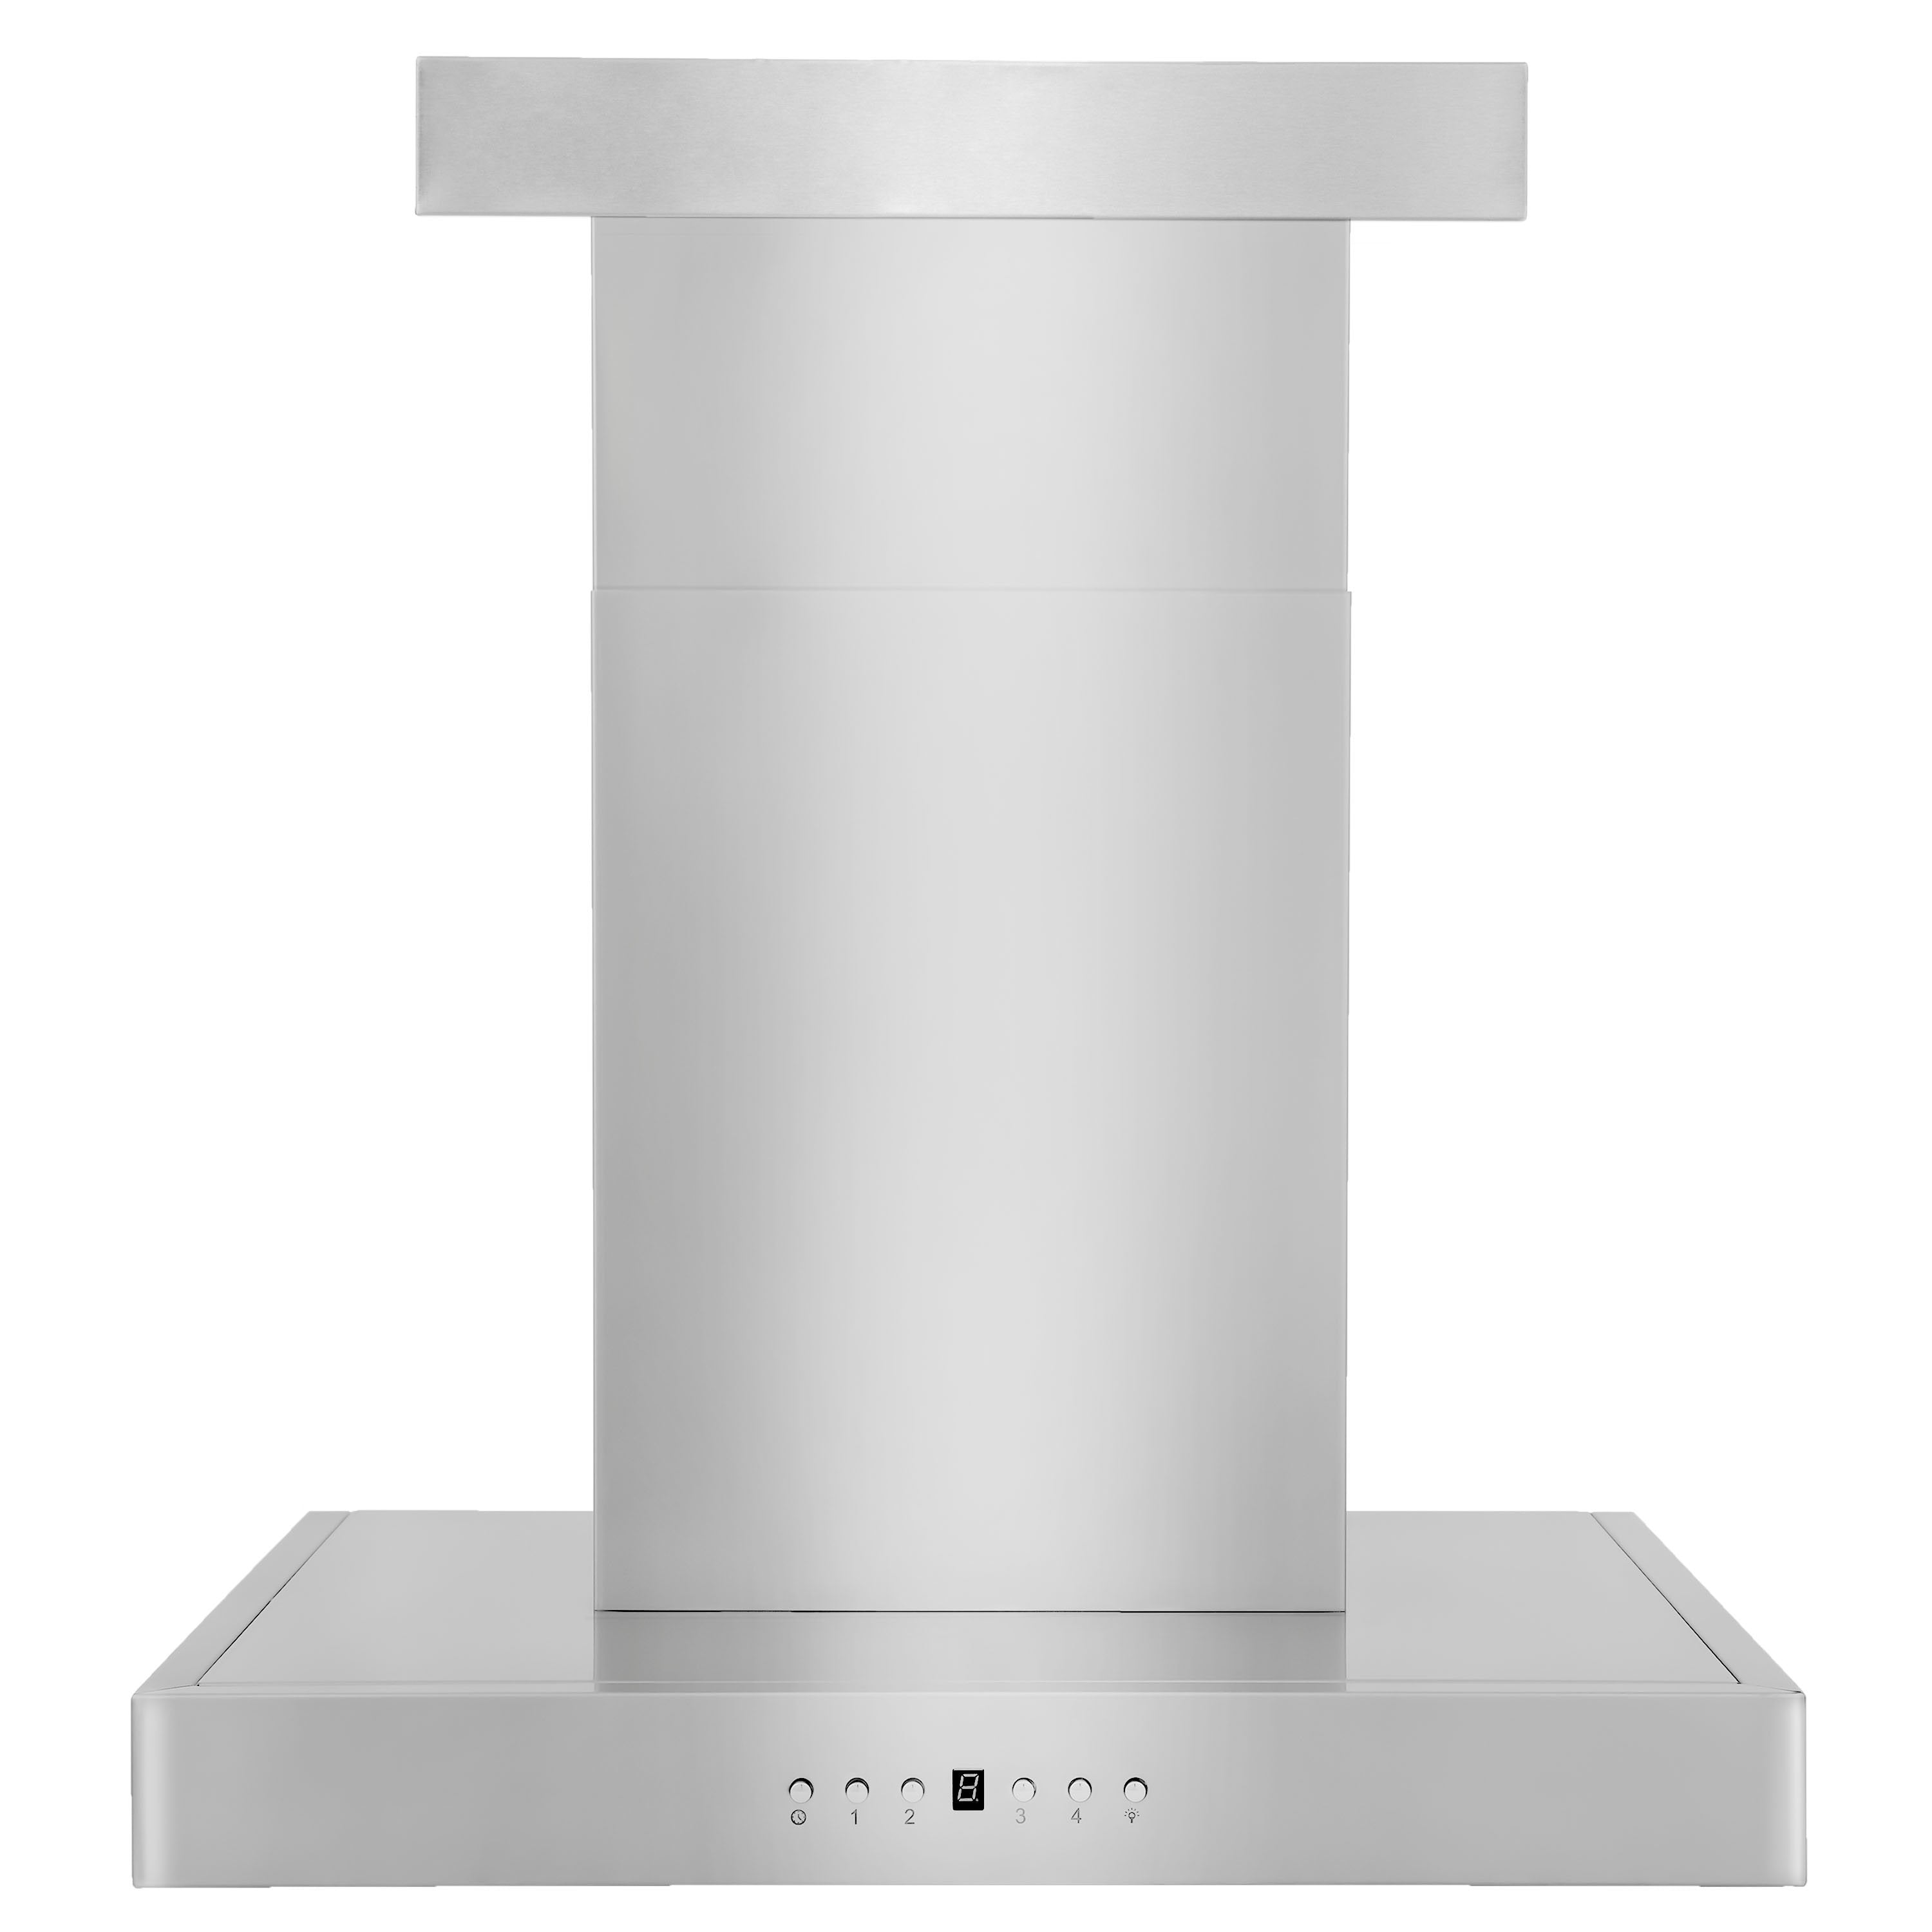 ZLINE Convertible Vent Wall Mount Range Hood in Stainless Steel with Crown Molding - KECRN